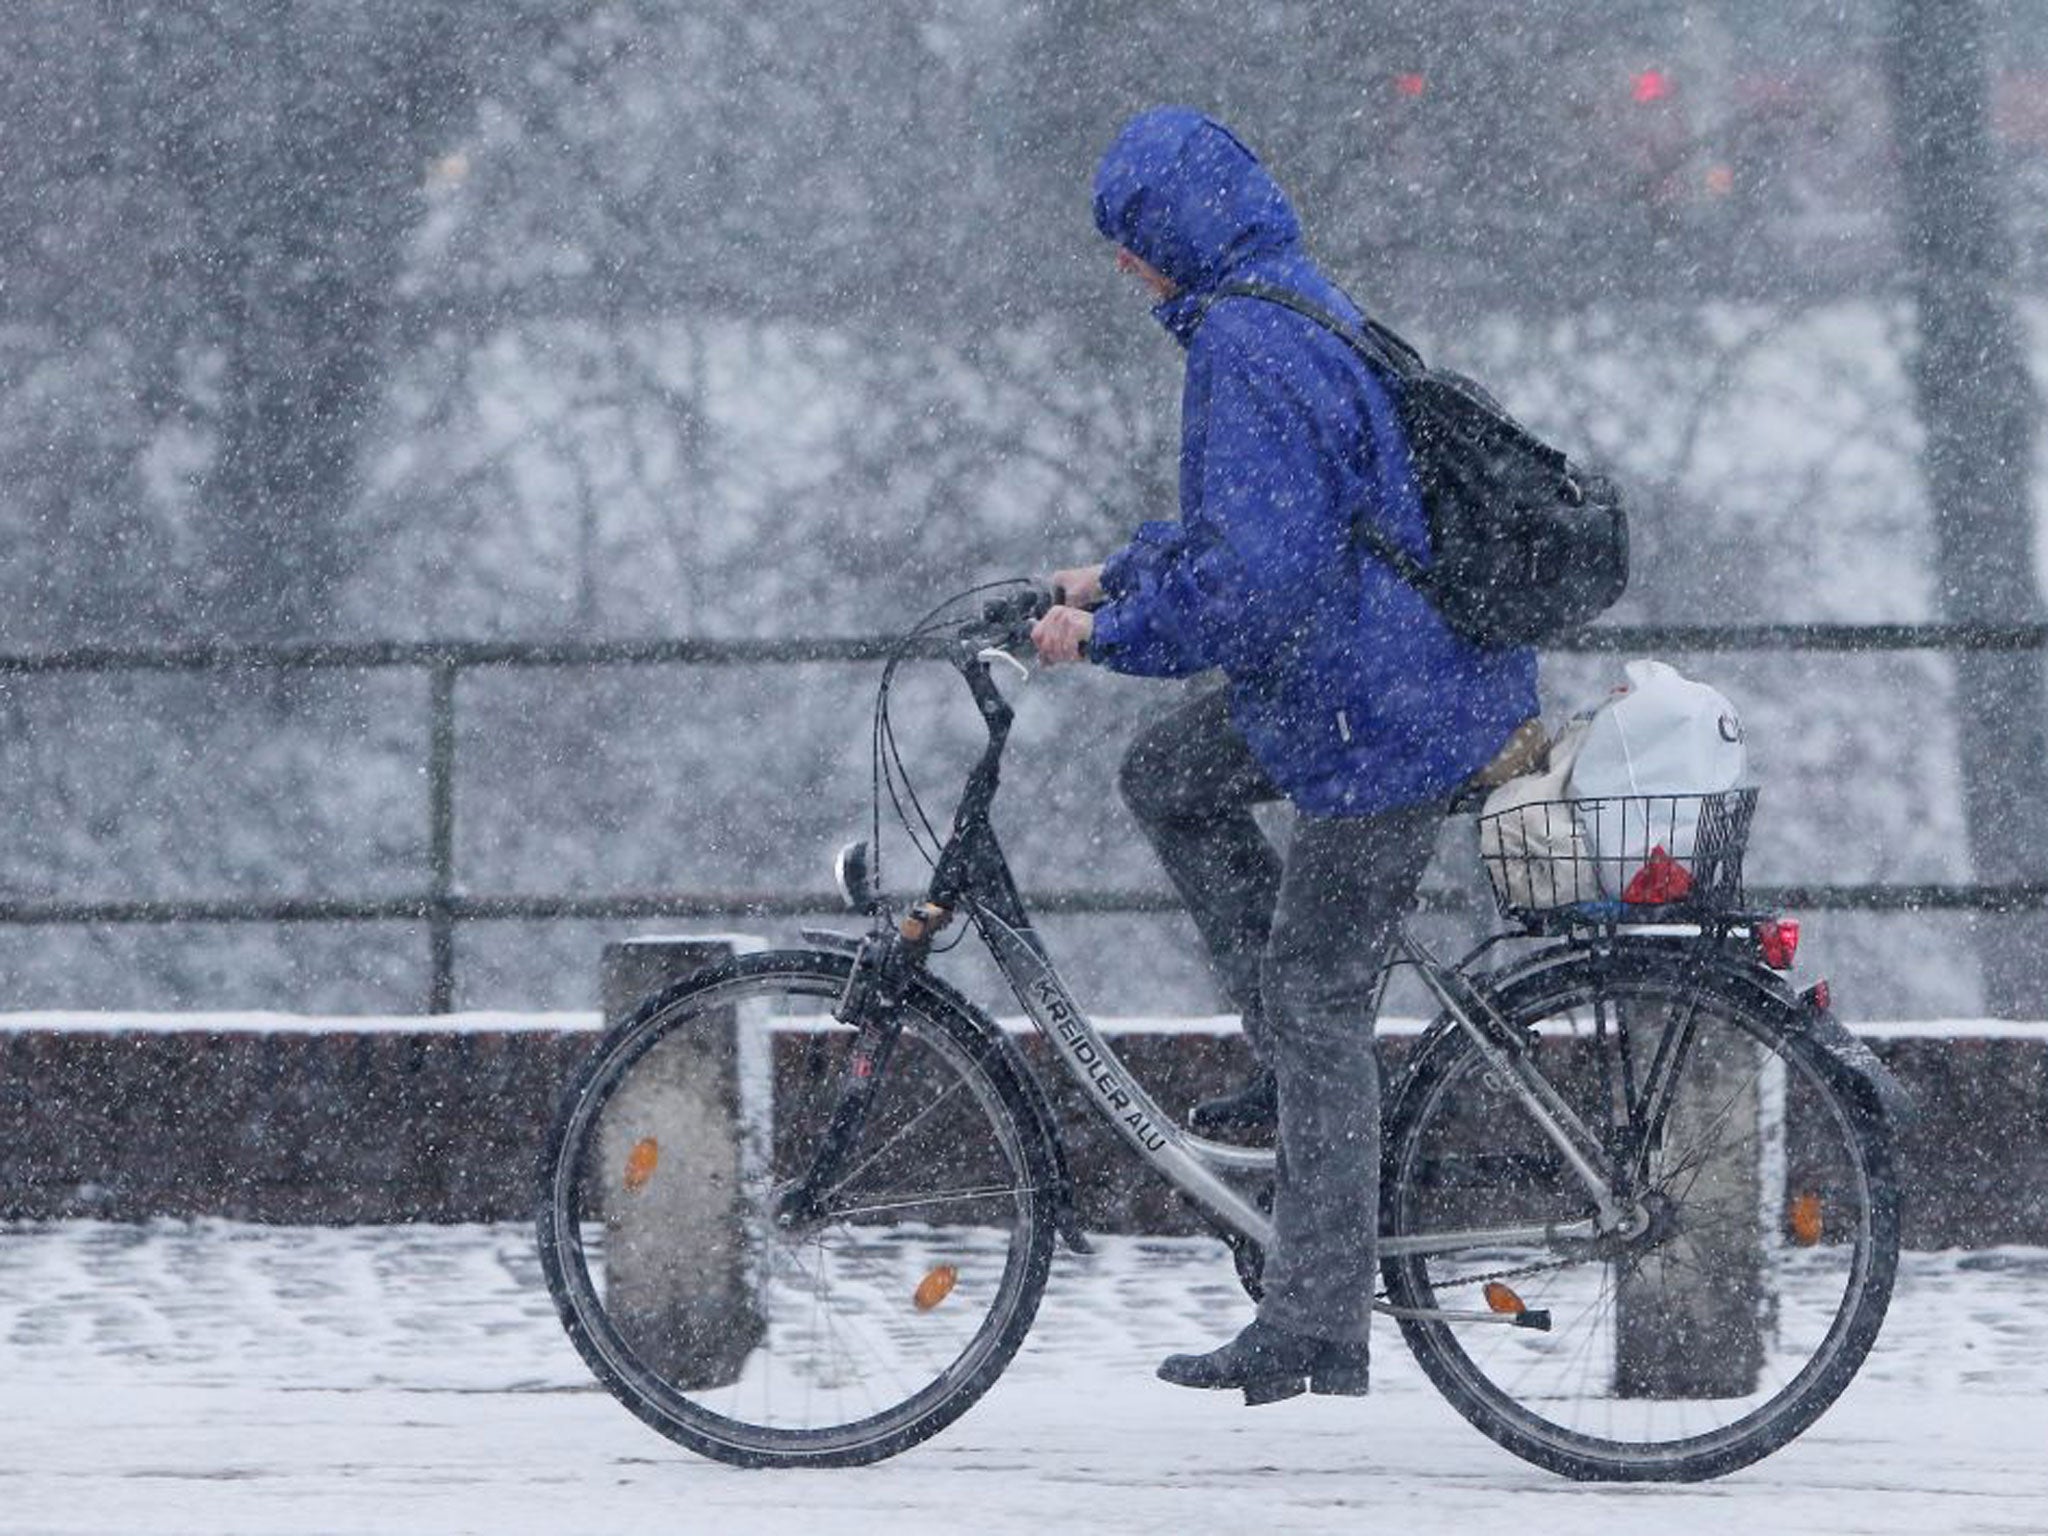 Snow is expected to fall across the country this weekend as plummeting temperatures usher in a cold snap